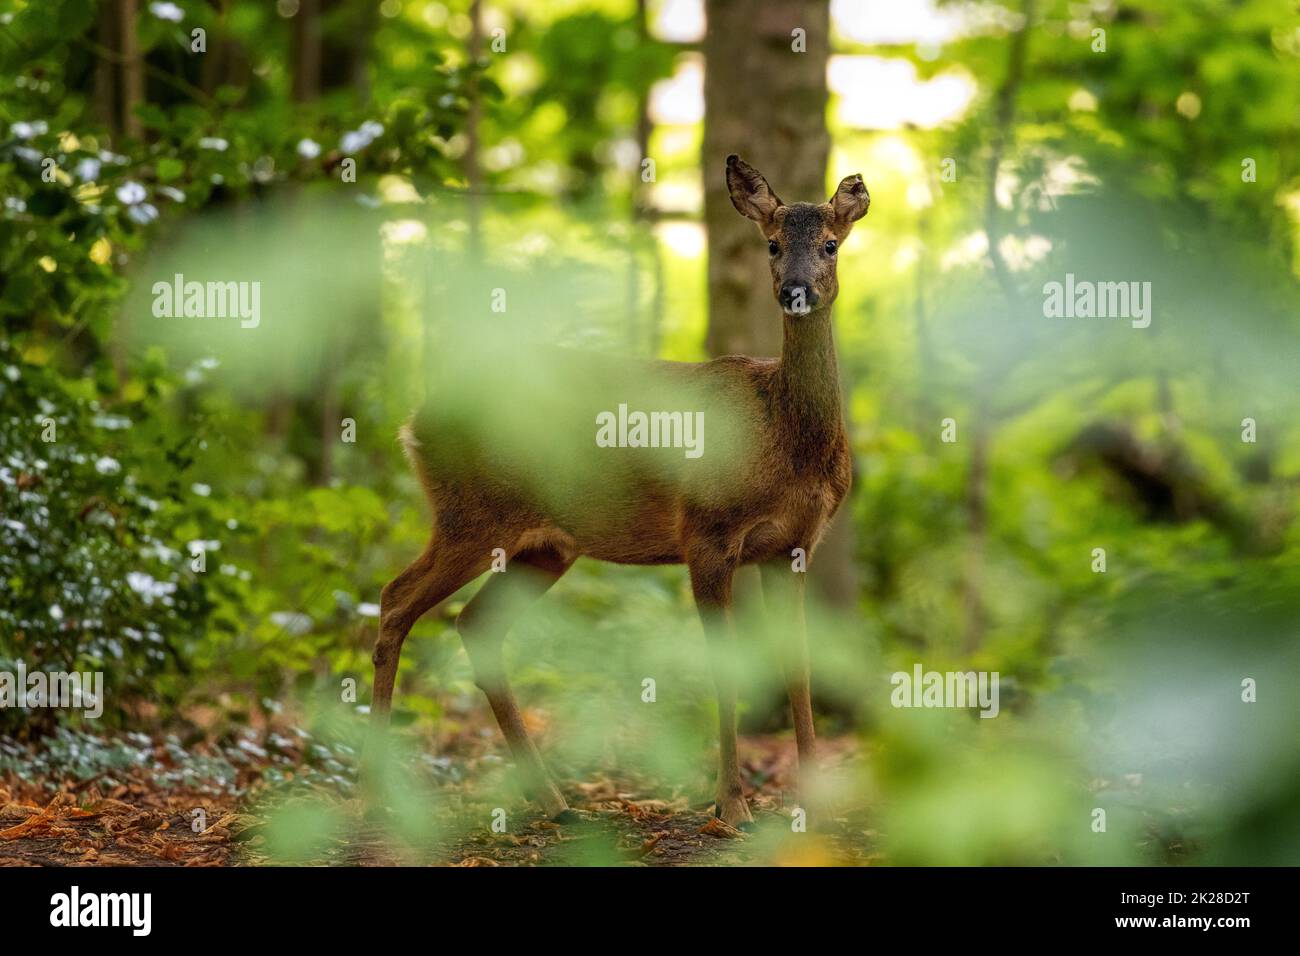 Solitary wild roe deer (Capreolus capreolus) looking at the camera through leaves in a woodland, West Yorkshire, England, UK Stock Photo